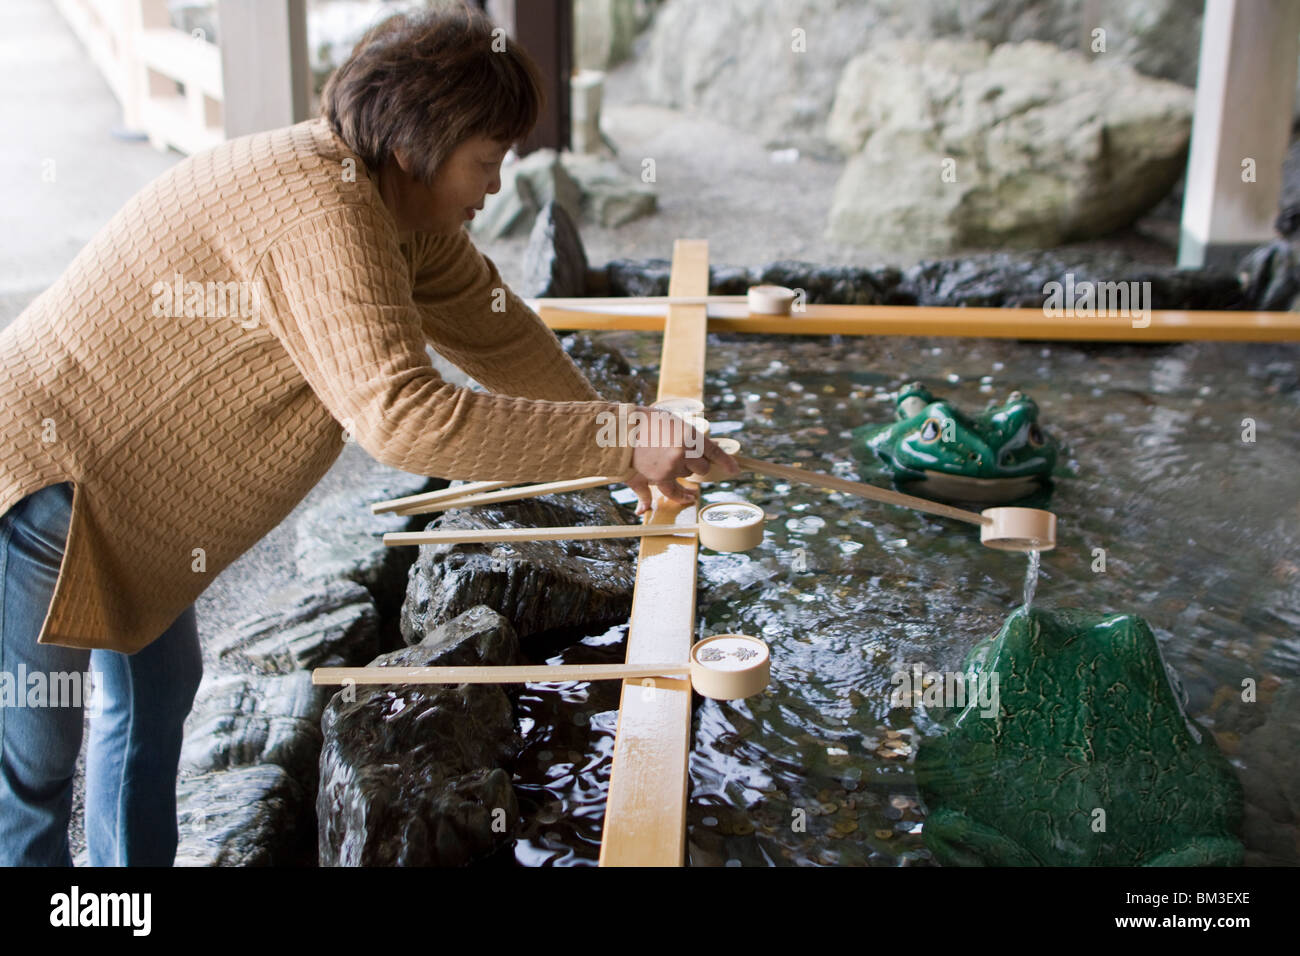 A place to cleanse your hands at the Okitama Shrine by Meoto Iwa the wedded rocks of Futami, Mie, Japan. Stock Photo